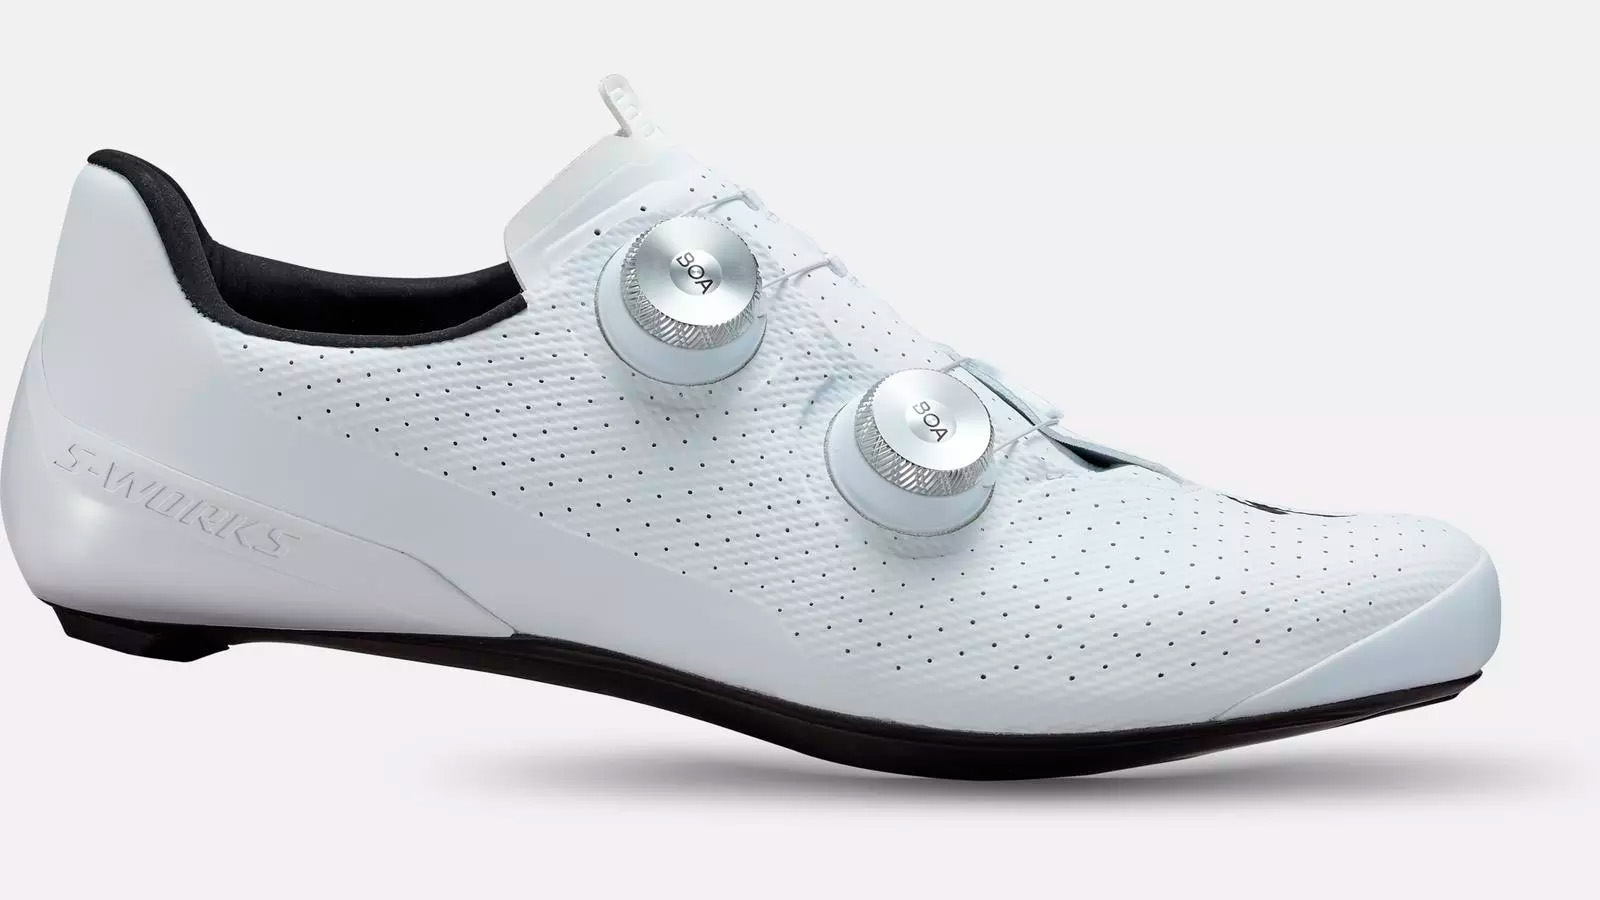 S-Works Torch Road Shoes